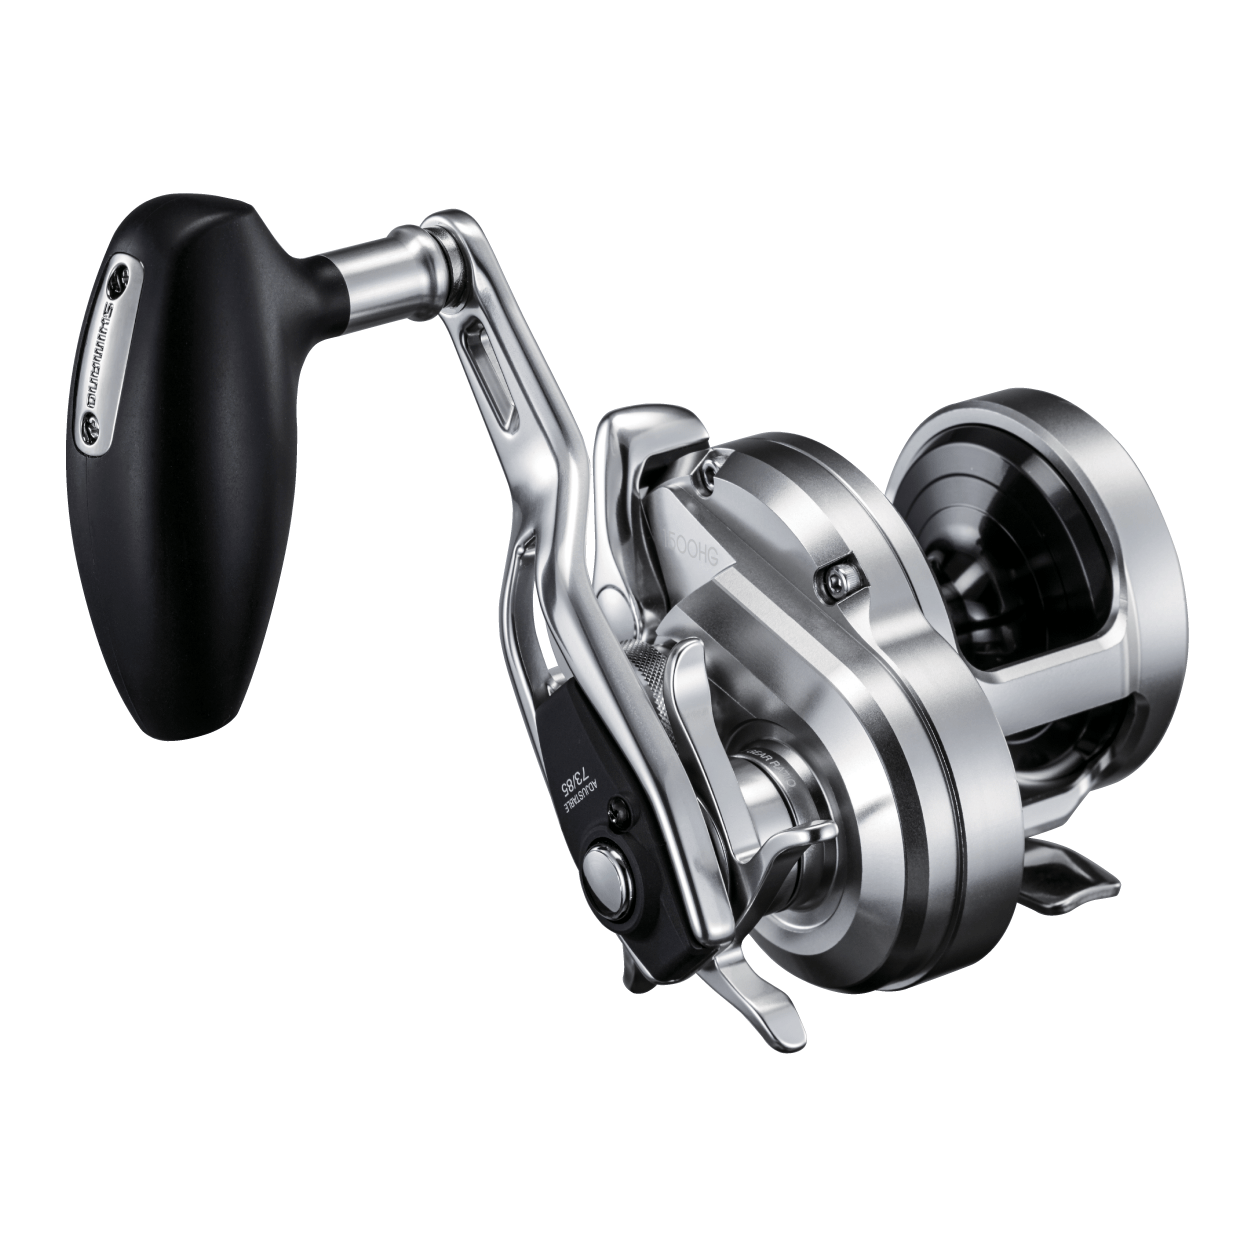 Which Shimano spinning reel for bottom fishing?